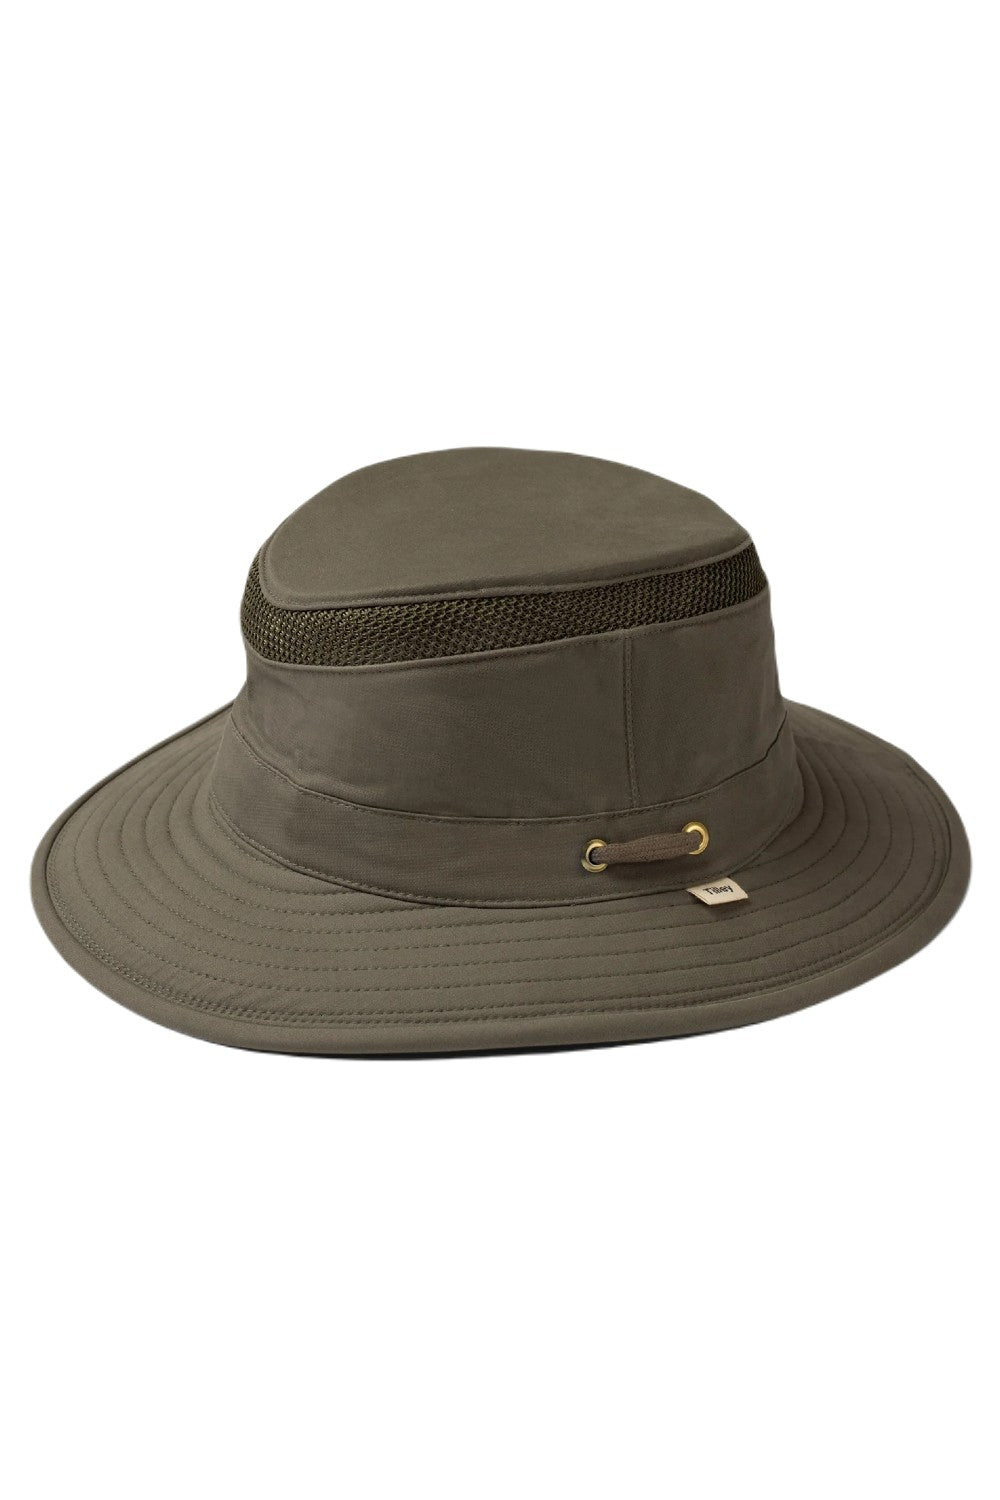 Tilley Hats Airflo Organic Cotton Hat In Olive 